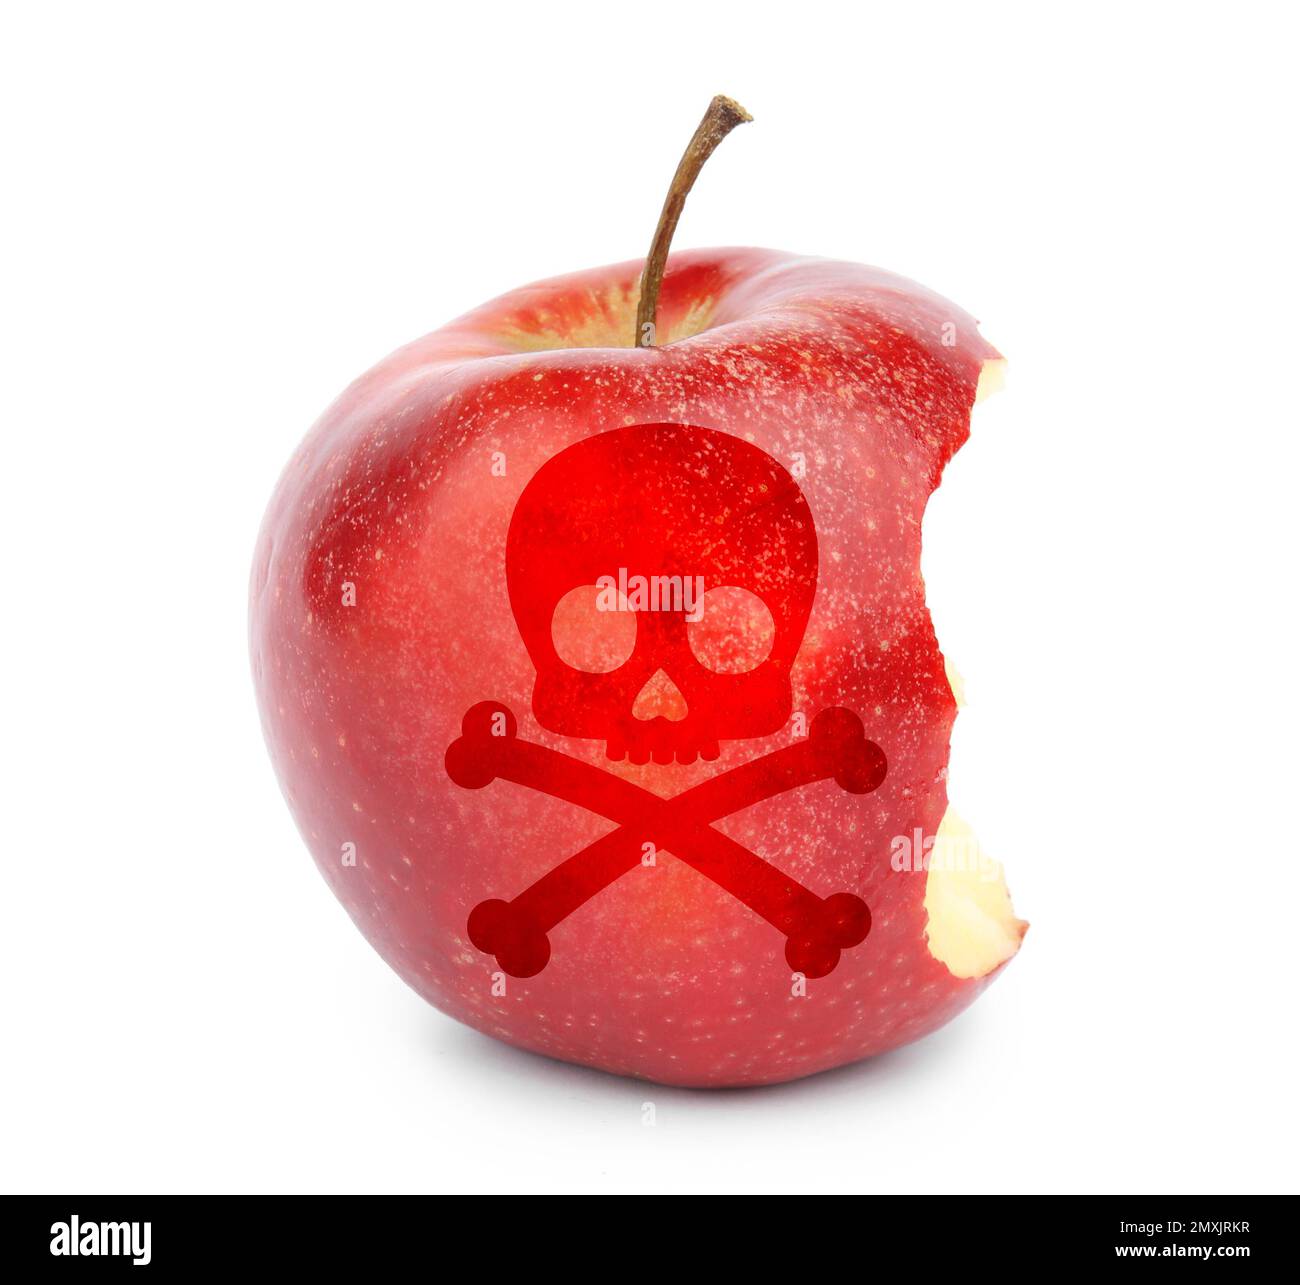 Bitten poison apple with skull and crossbones image on white background Stock Photo